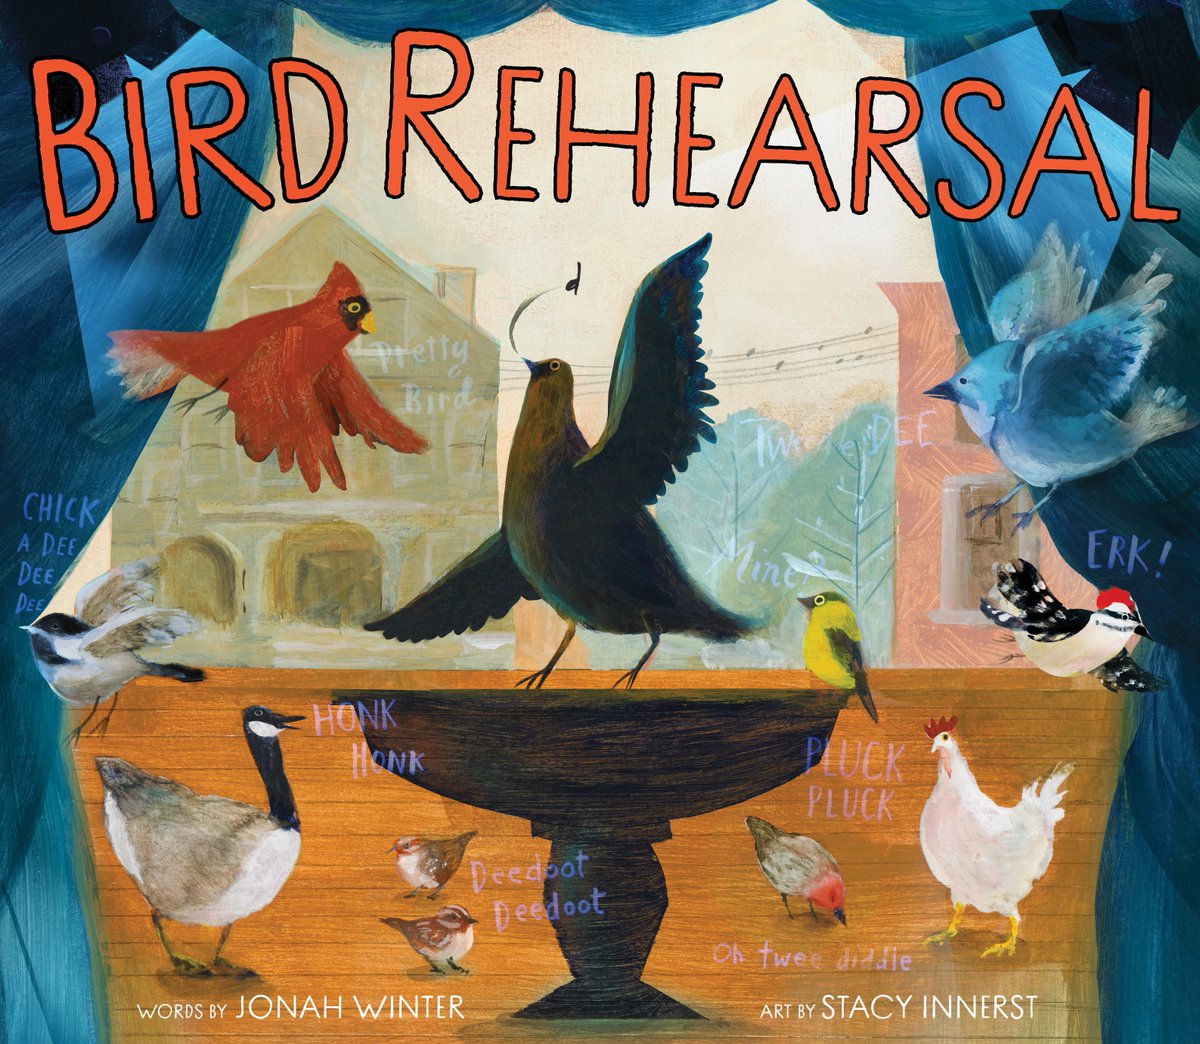 Experience the glorious musicality of birds in #BirdRehearsal, a picture book told entirely in birdsong from Jonah Winter and @StacyInnerst! Pick up a copy and join the birds in a raucous romp through the neighborhood! #BookBirthday bit.ly/49n0eJ4